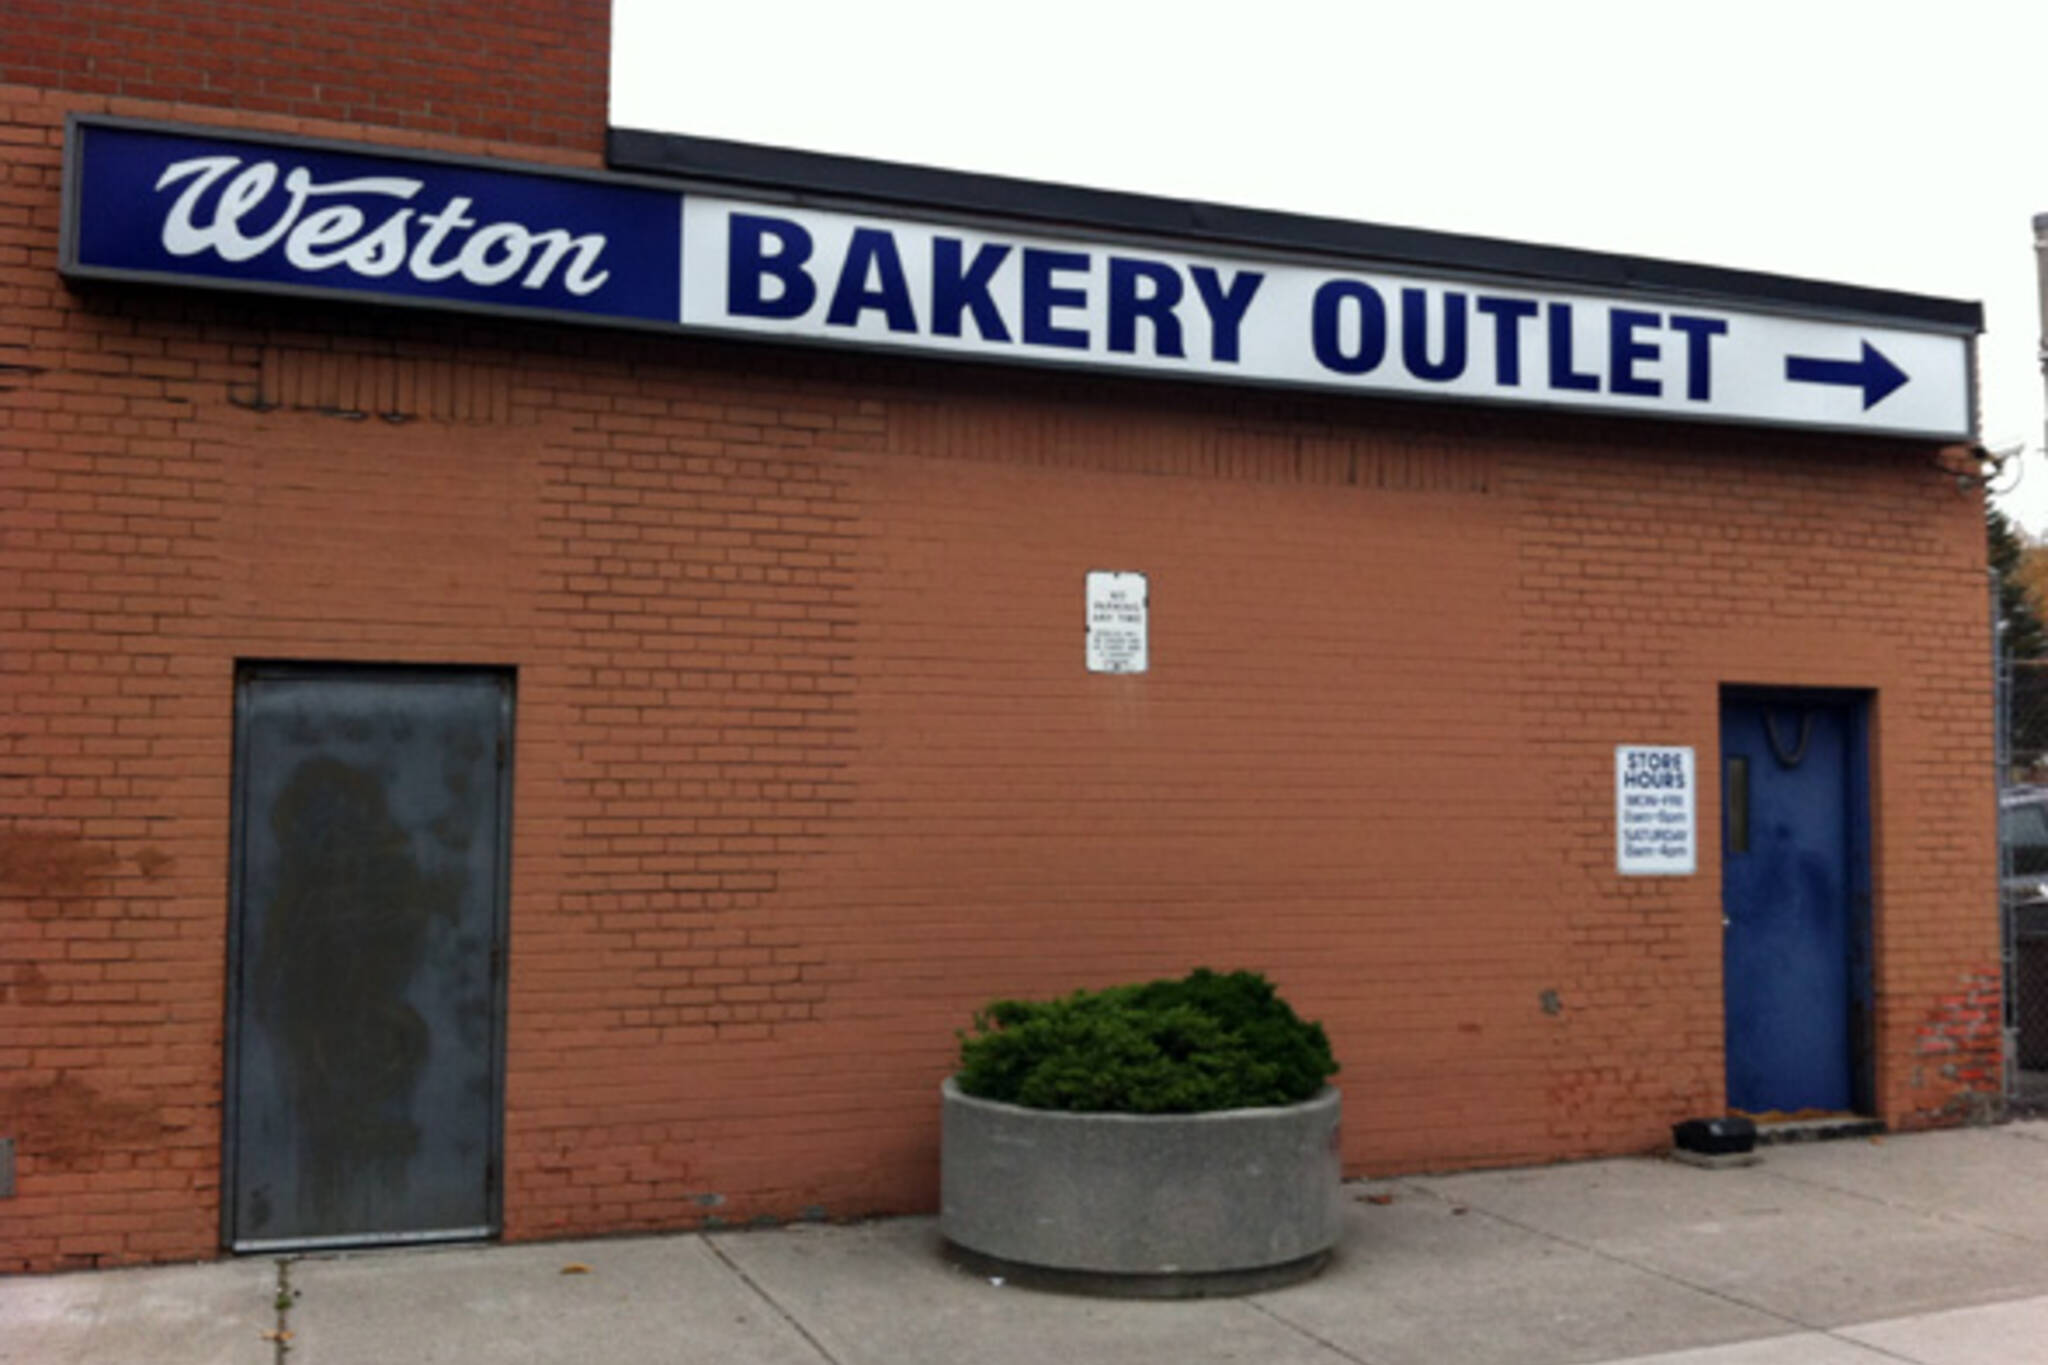 Weston Bakery Outlet